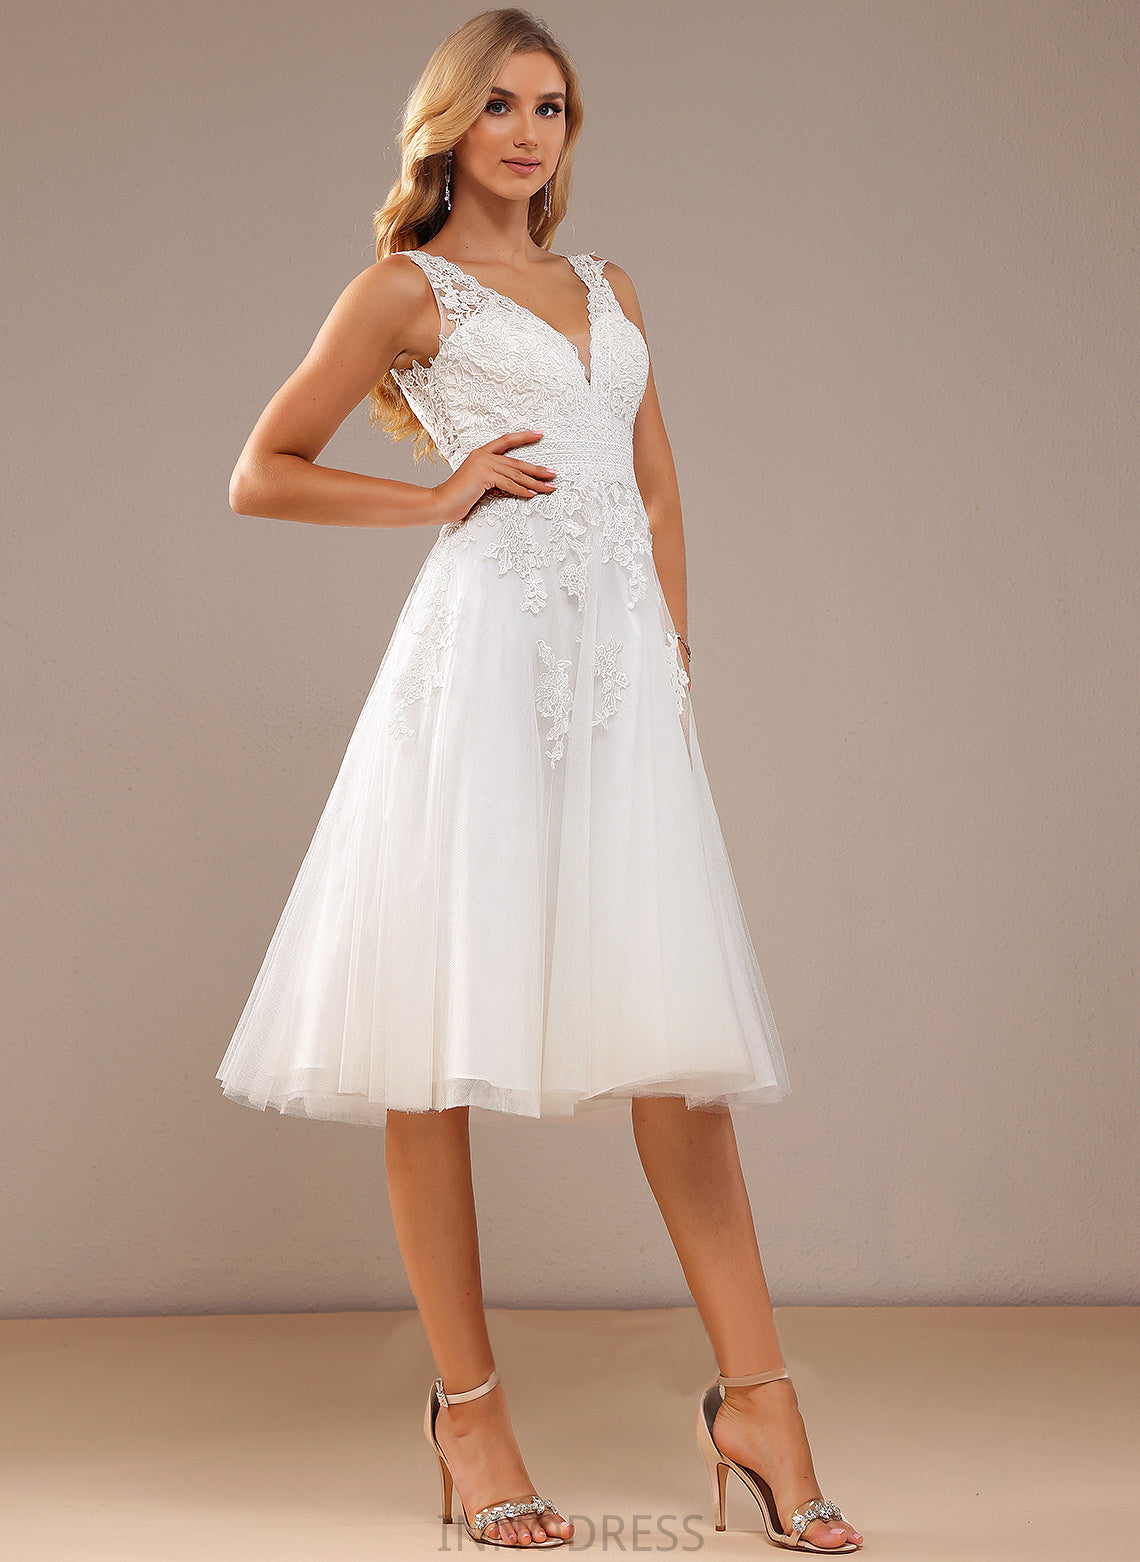 Wedding Dresses Dress Knee-Length Wedding Lace V-neck Tulle A-Line Janey With Lace